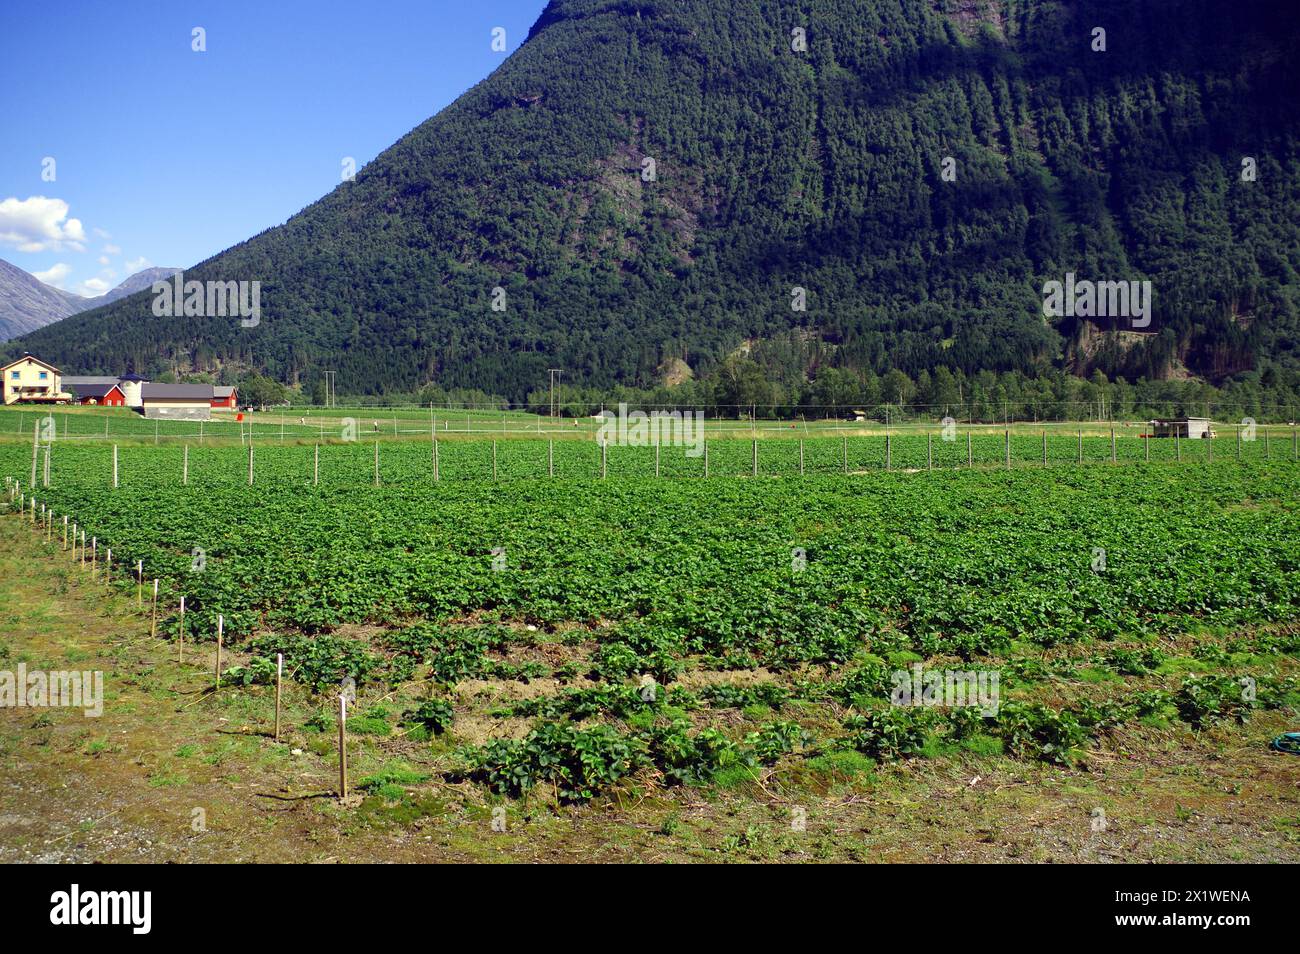 Vast strawberry plantations in a valley, mild climate, Fjordland, Valldal, Norway Stock Photo